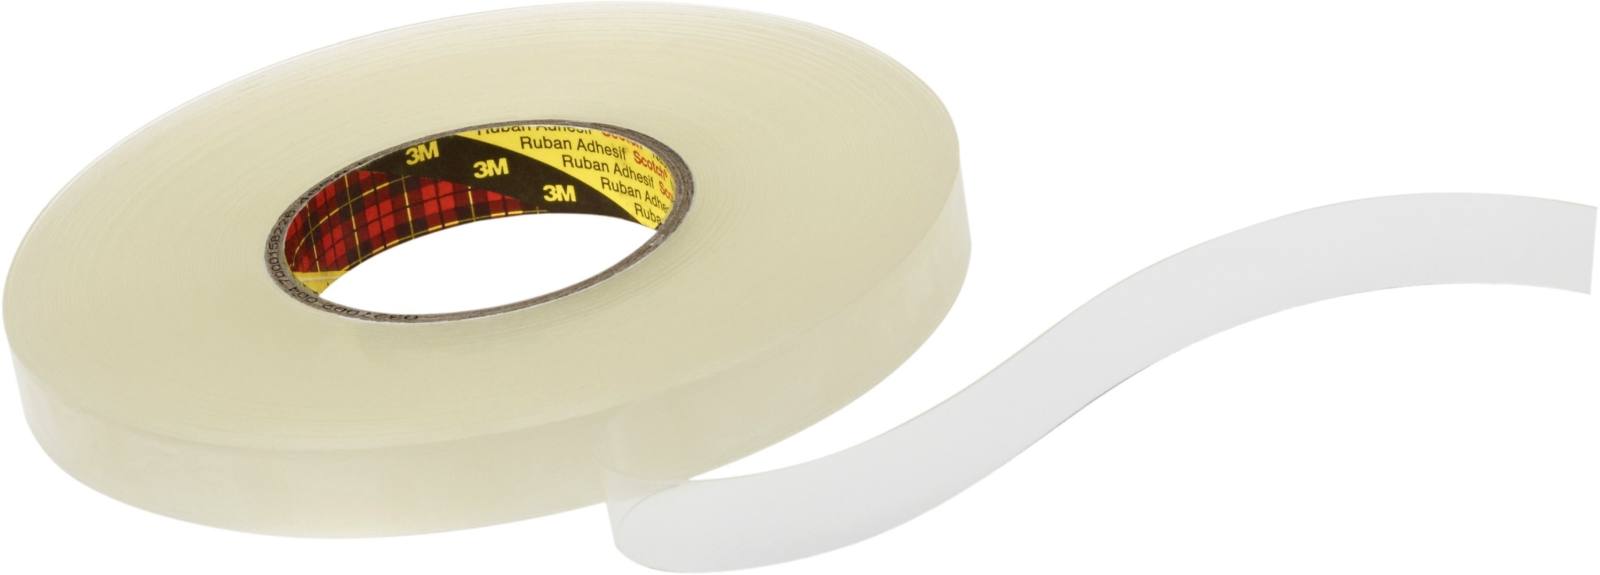 3M Double-sided removable adhesive tape 4658F, transparent, 9 mm x 25 m, 0.8 mm